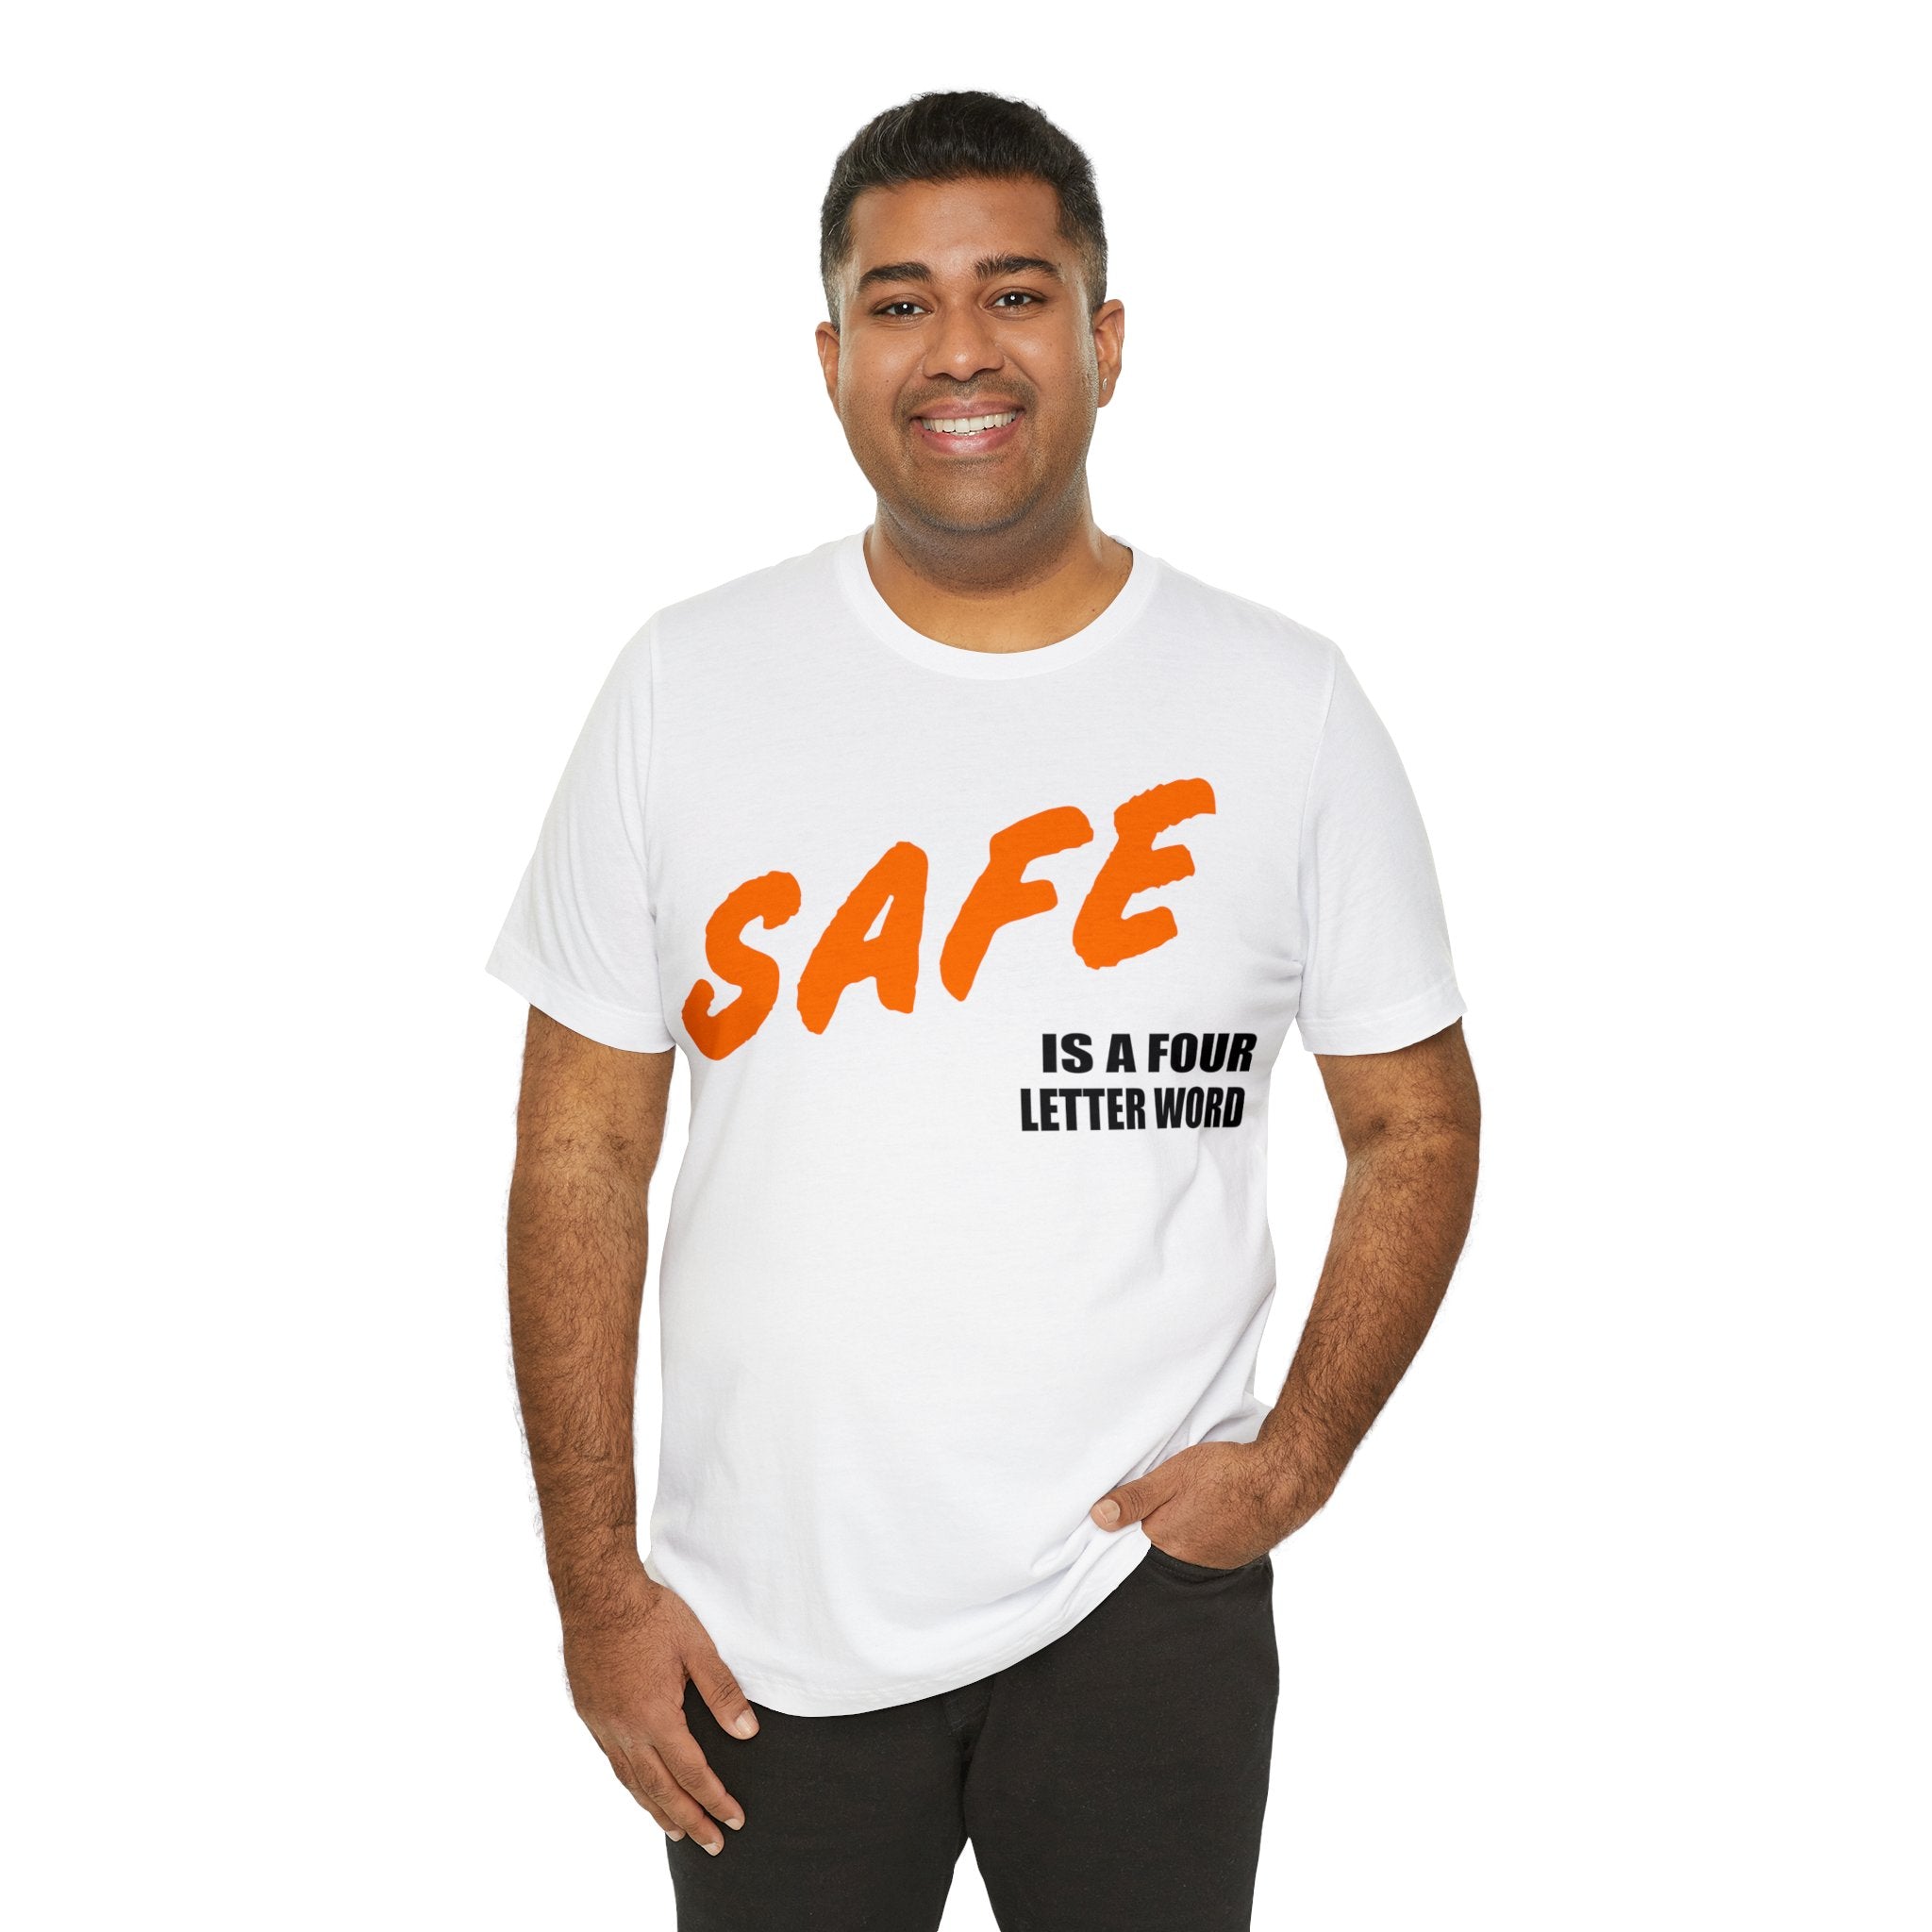 SAFE is a Four Letter Word